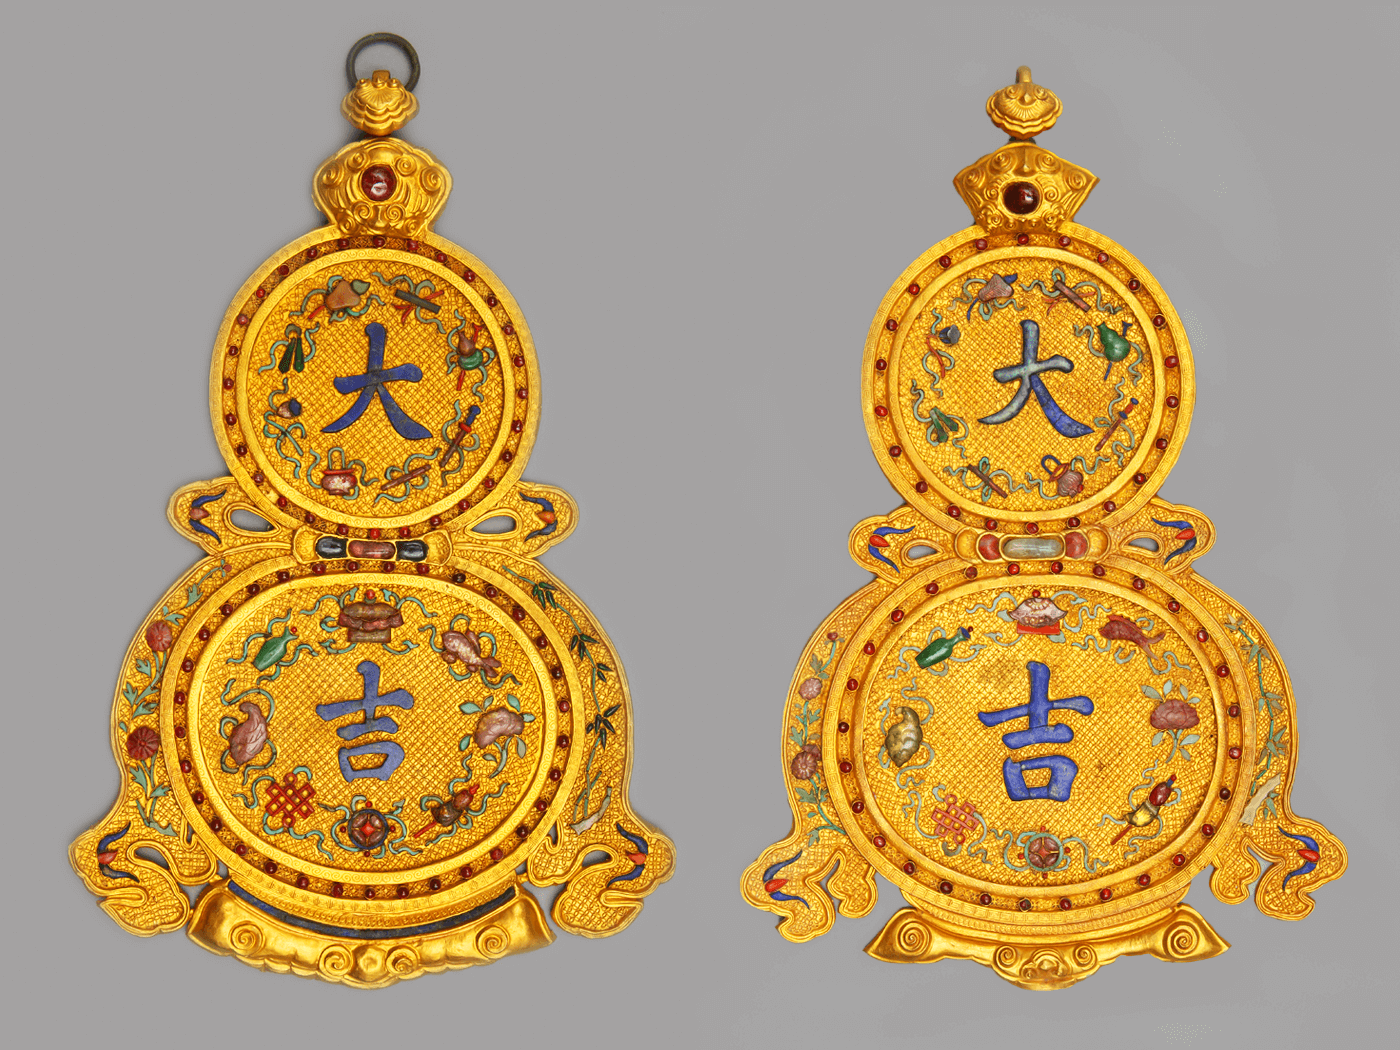 Two double gourd-shaped hangings with auspicious characters